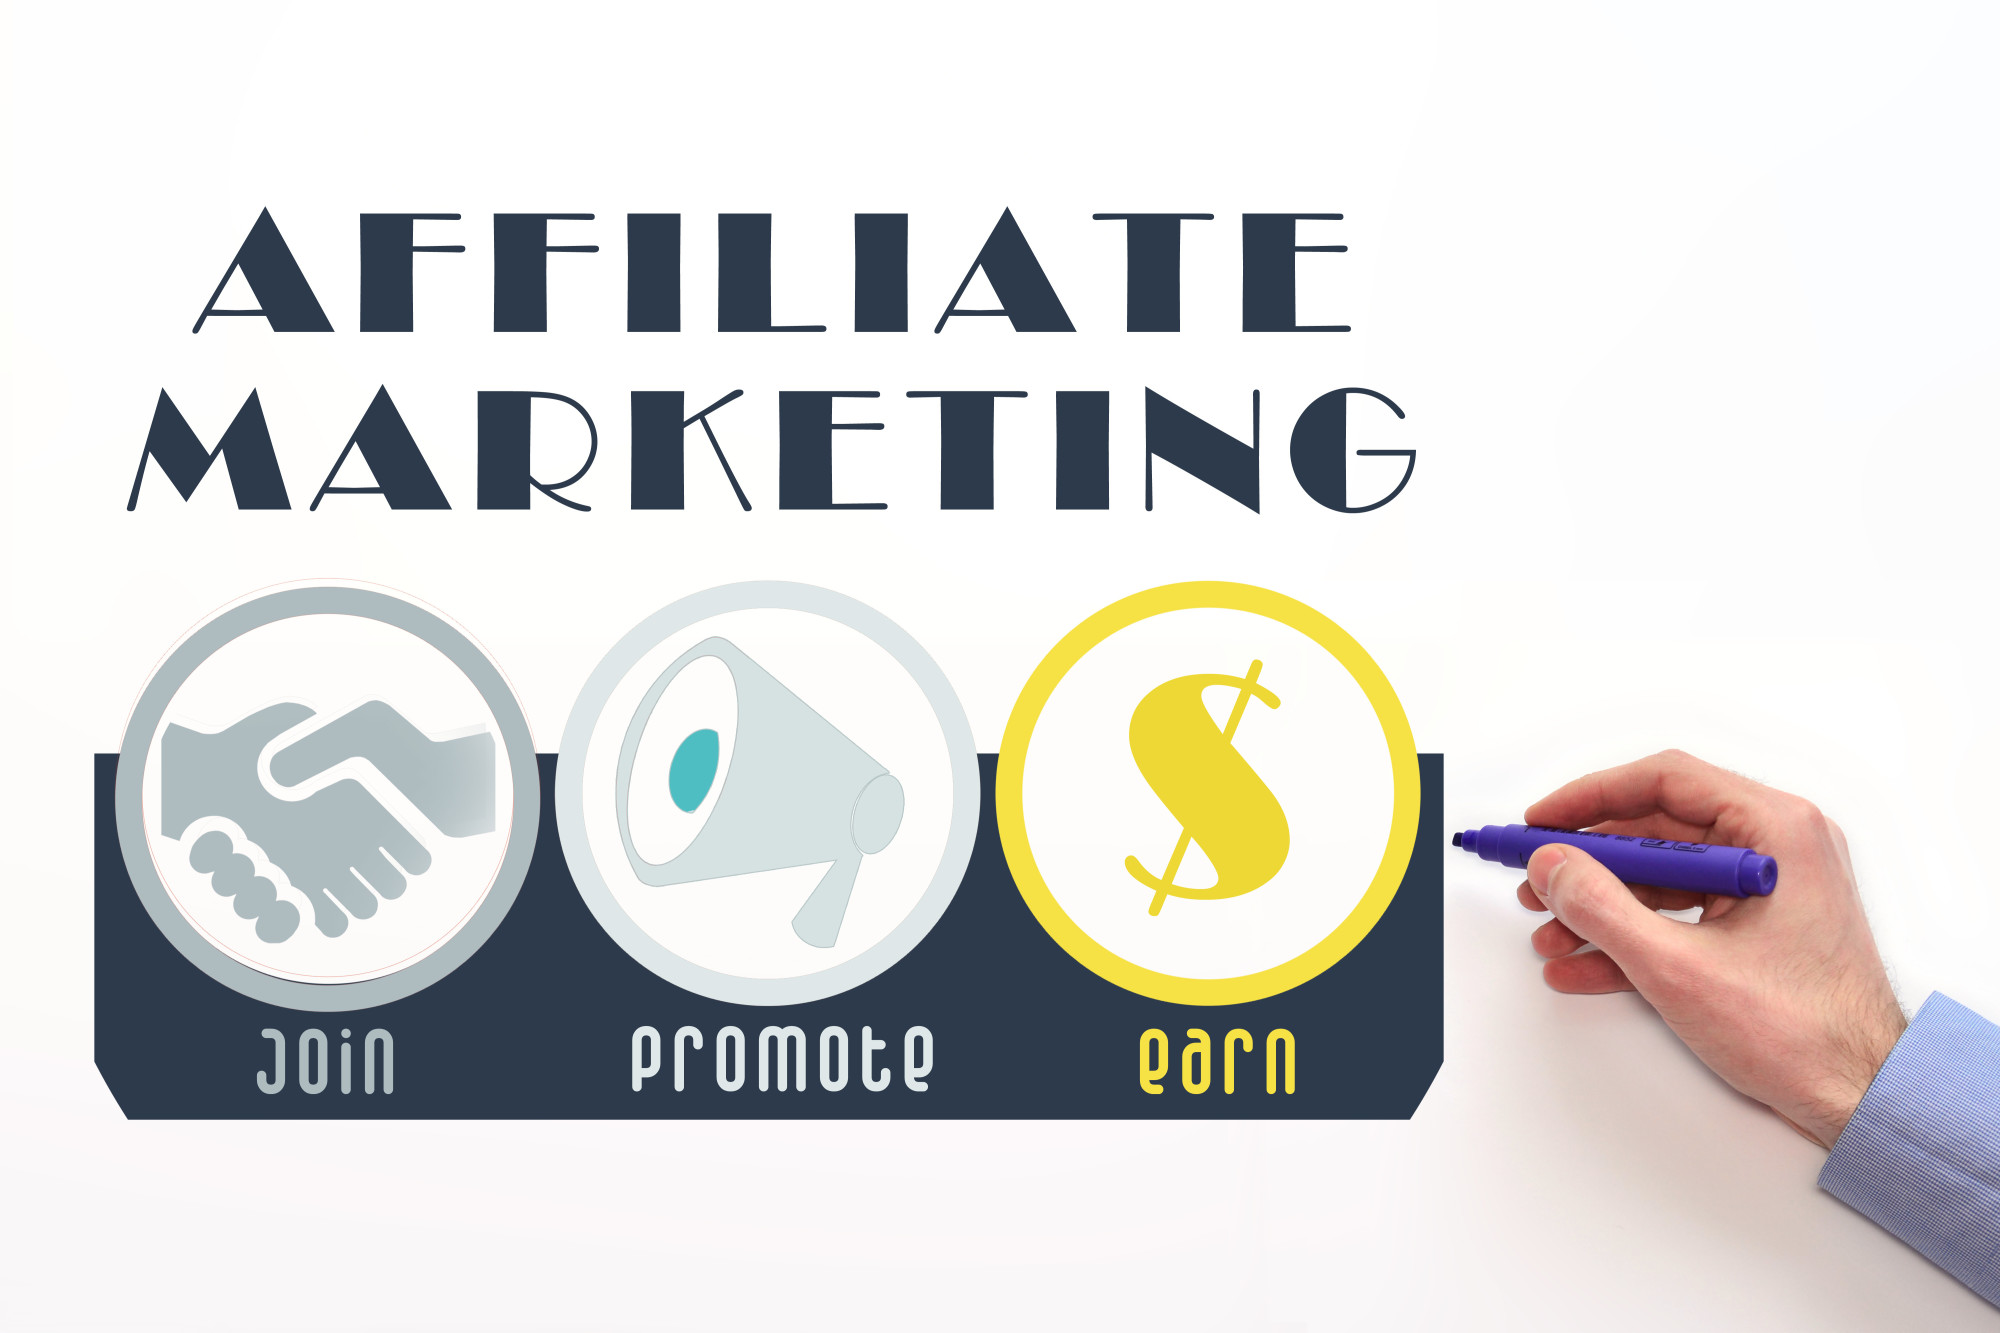 affiliate marketing text and icons